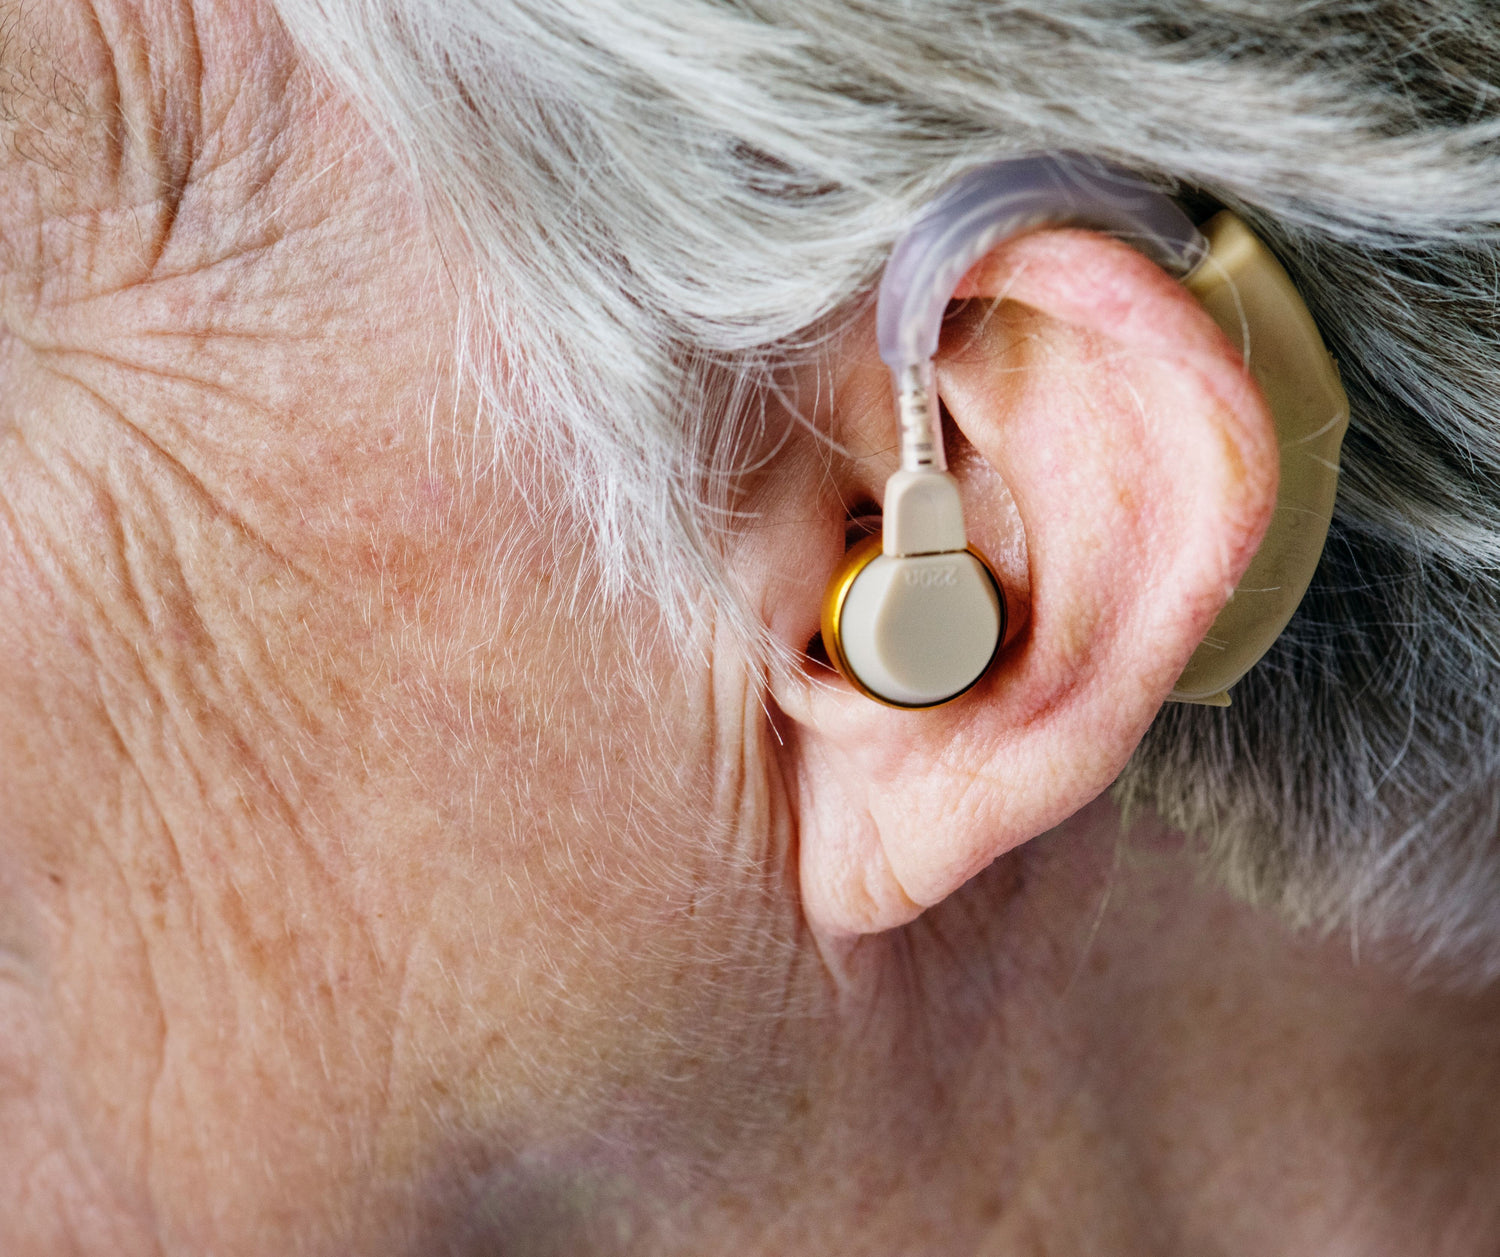 Consumer Guide to Affordable Hearing Aids